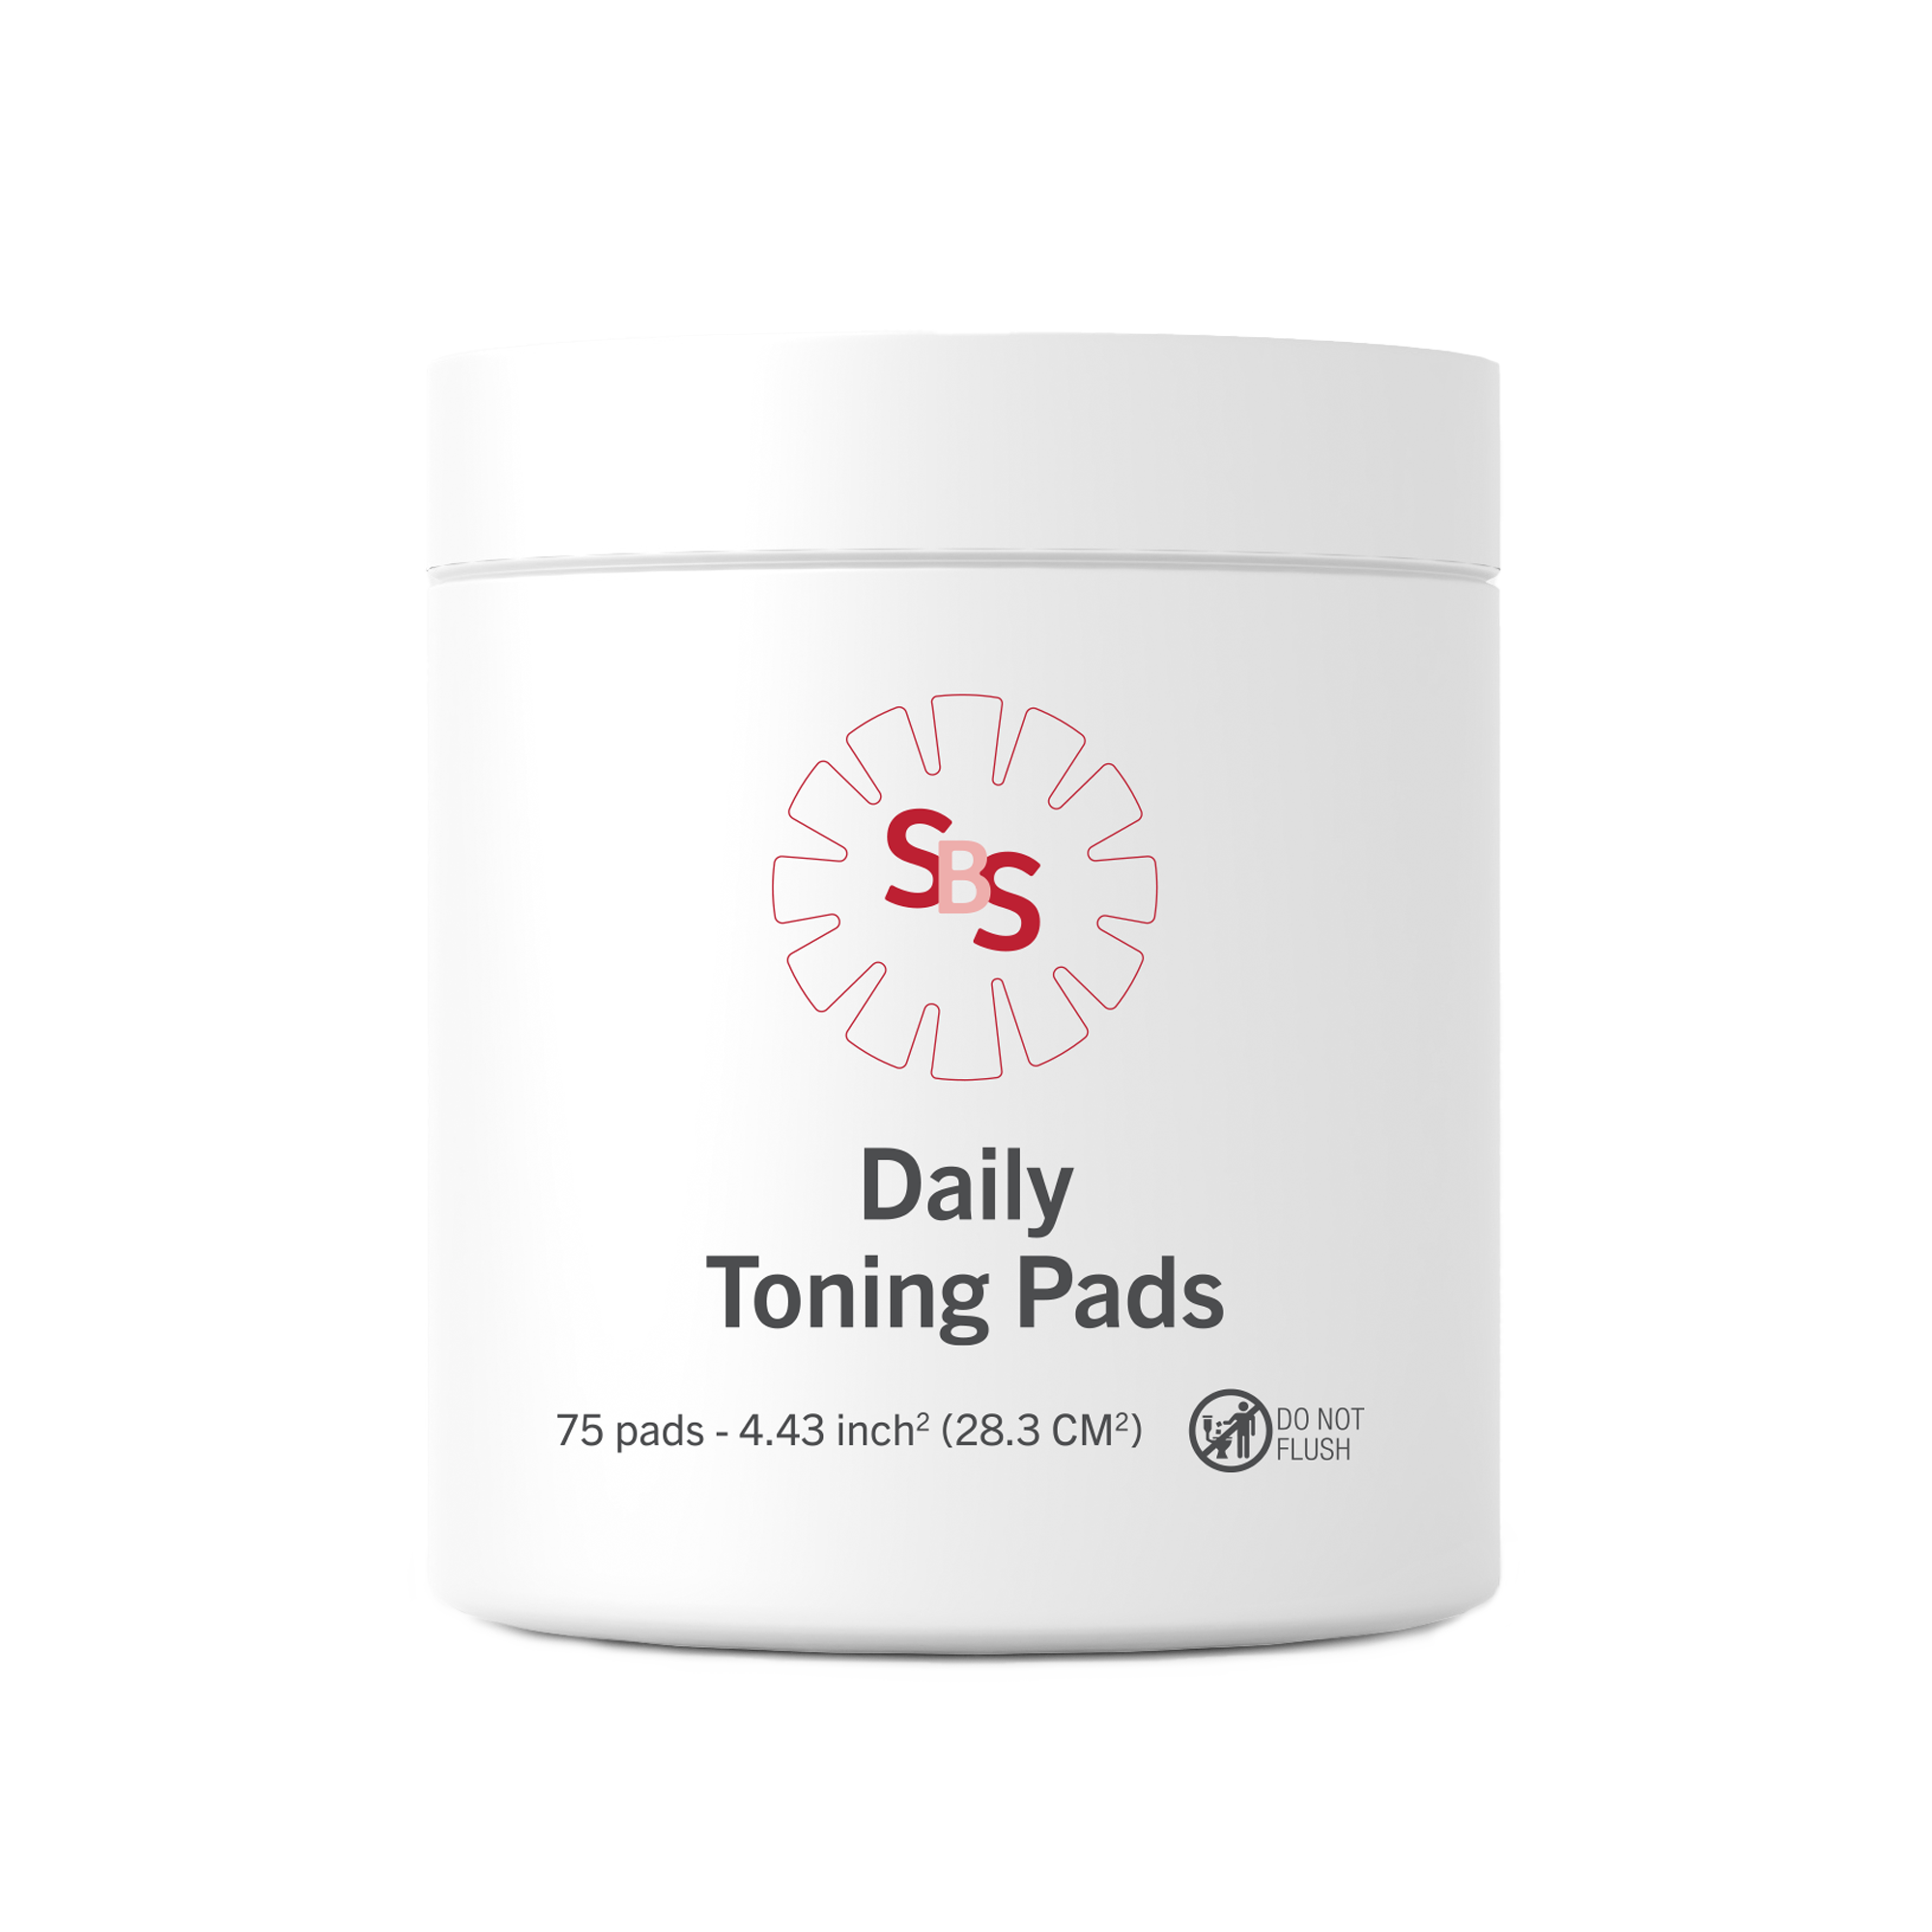 SBS Daily Toning Pads